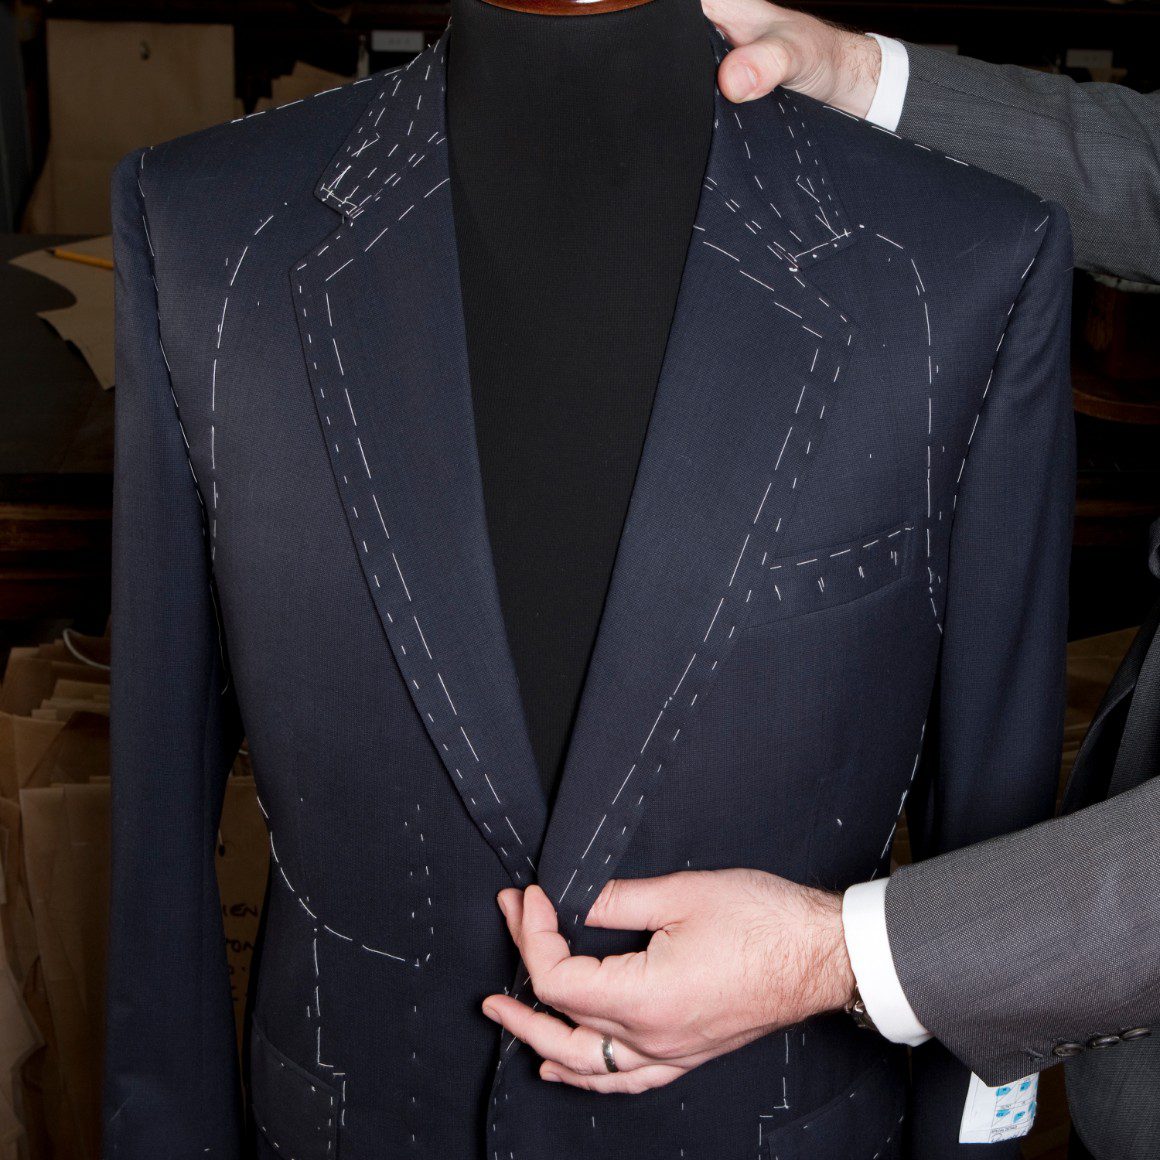 Tailor measuring for a bespoke suit